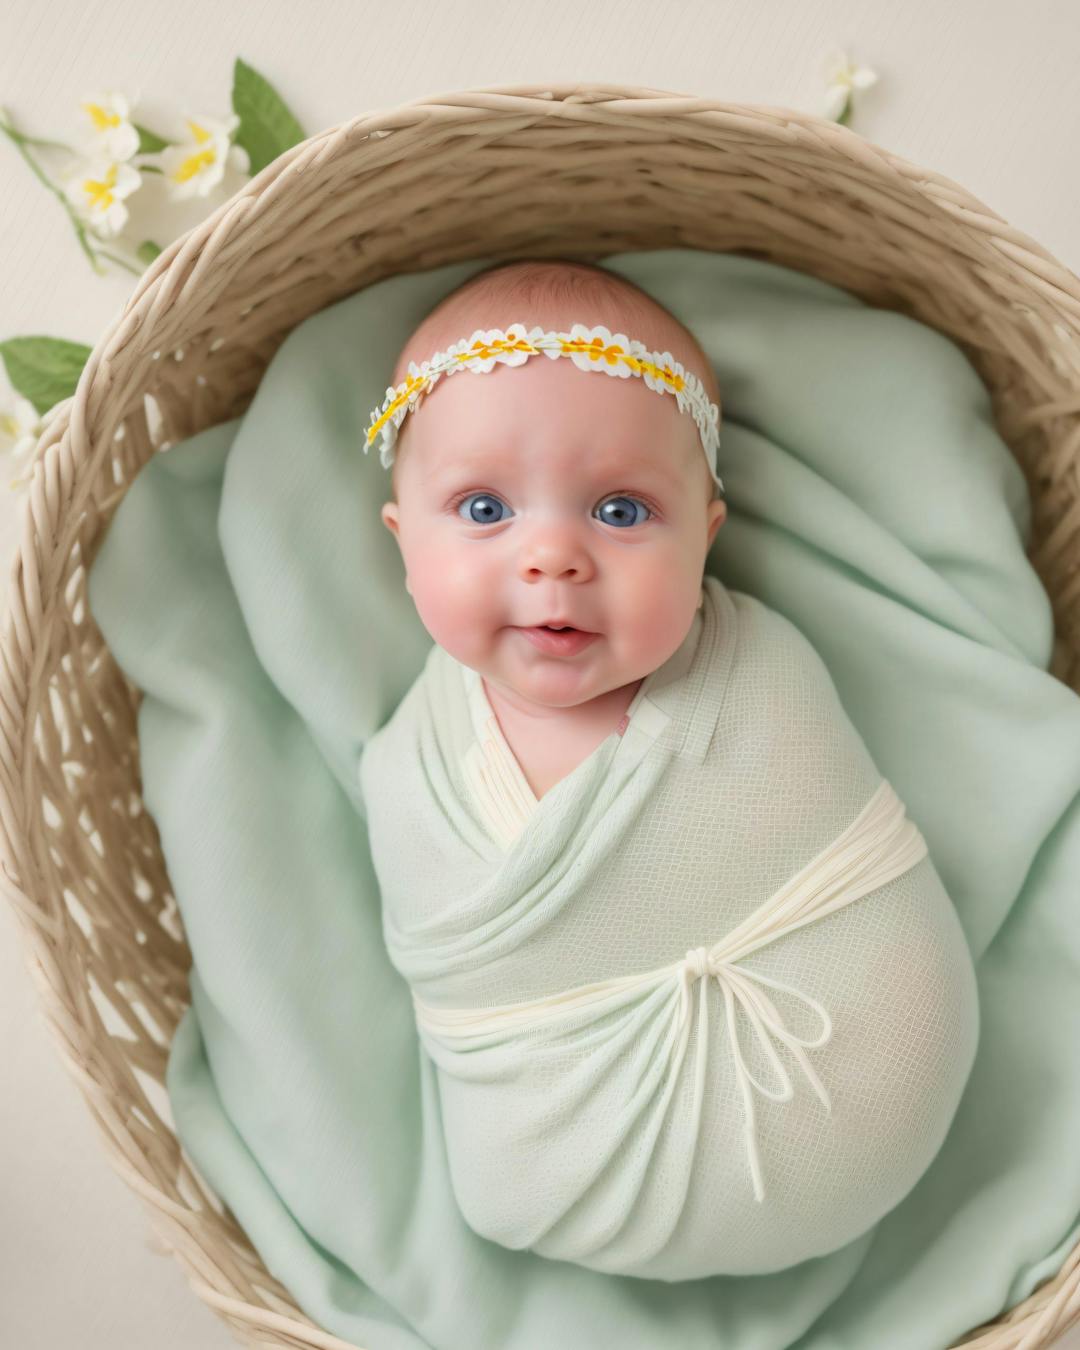 Dan Mindru's testimonial for Beautiful Baby Photography without the Photoshoot